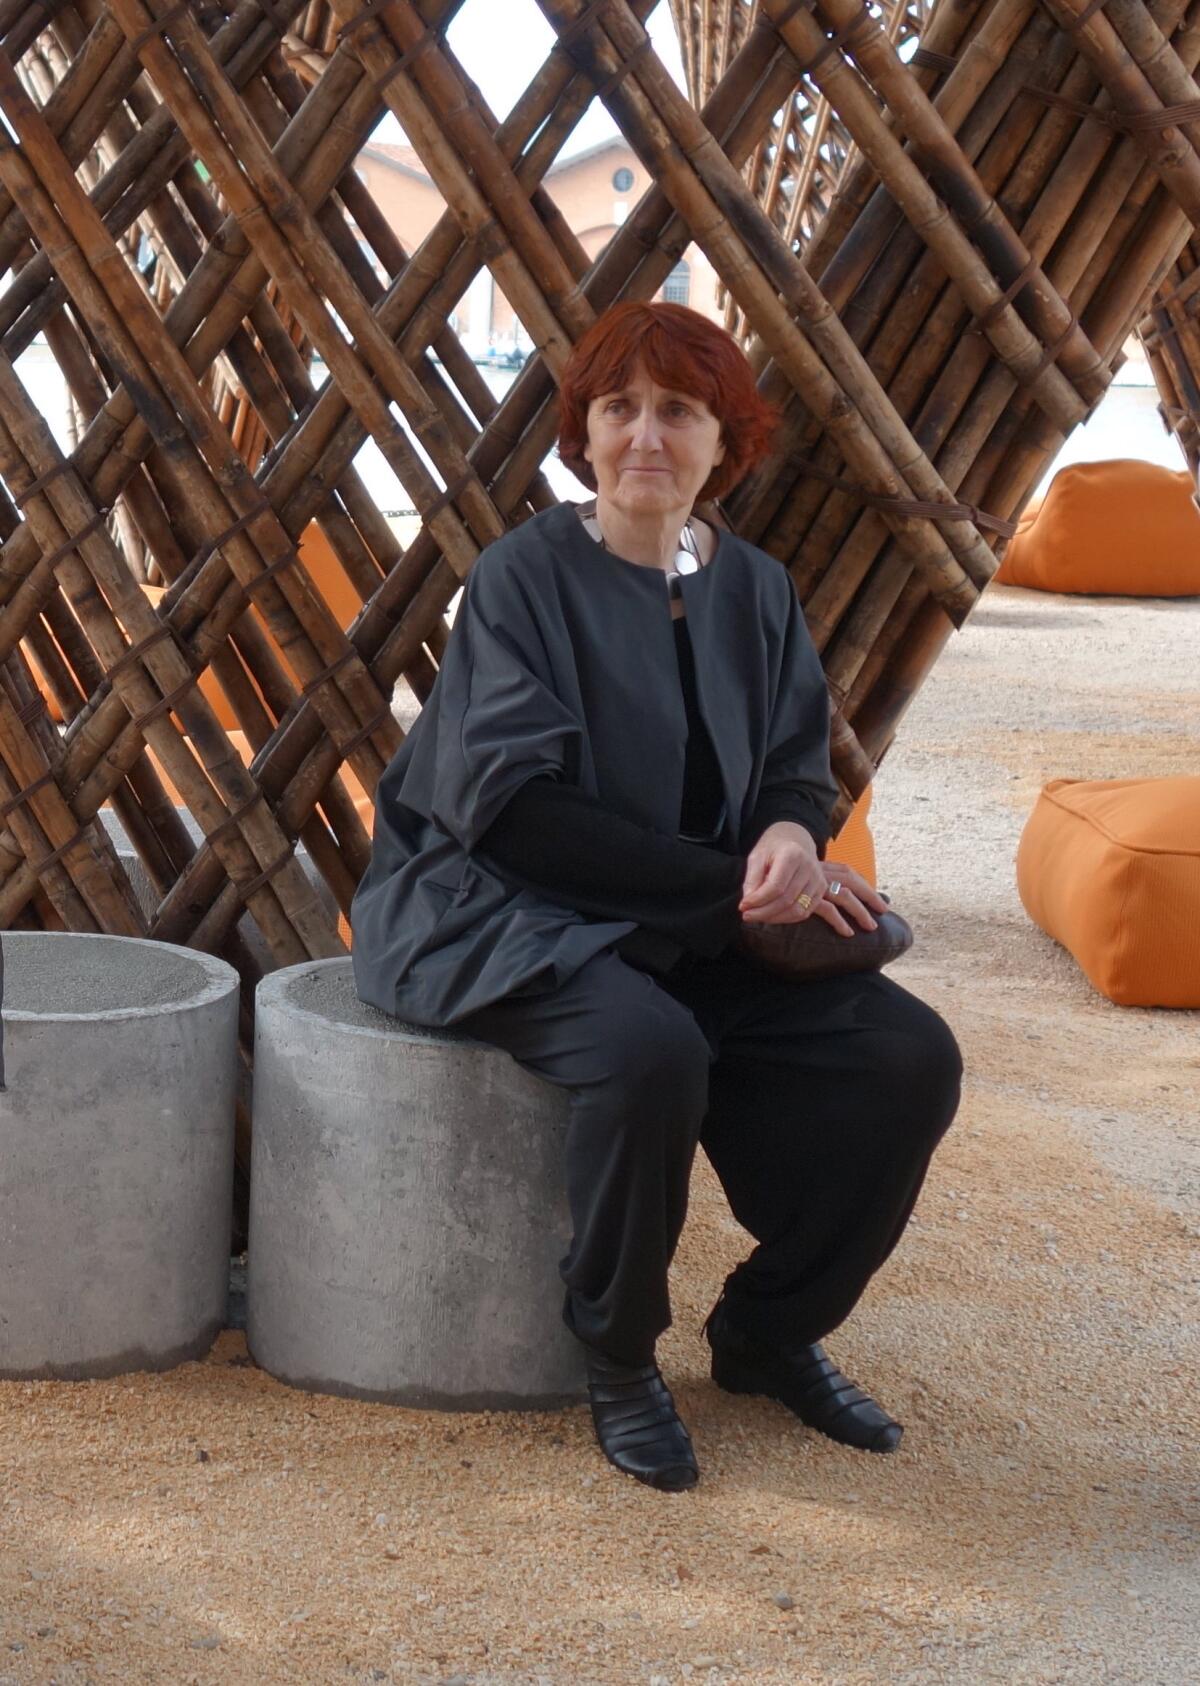 Grafton Architects' Shelley McNamara during a walk-through of the 2018 Venice Architecture Biennale.